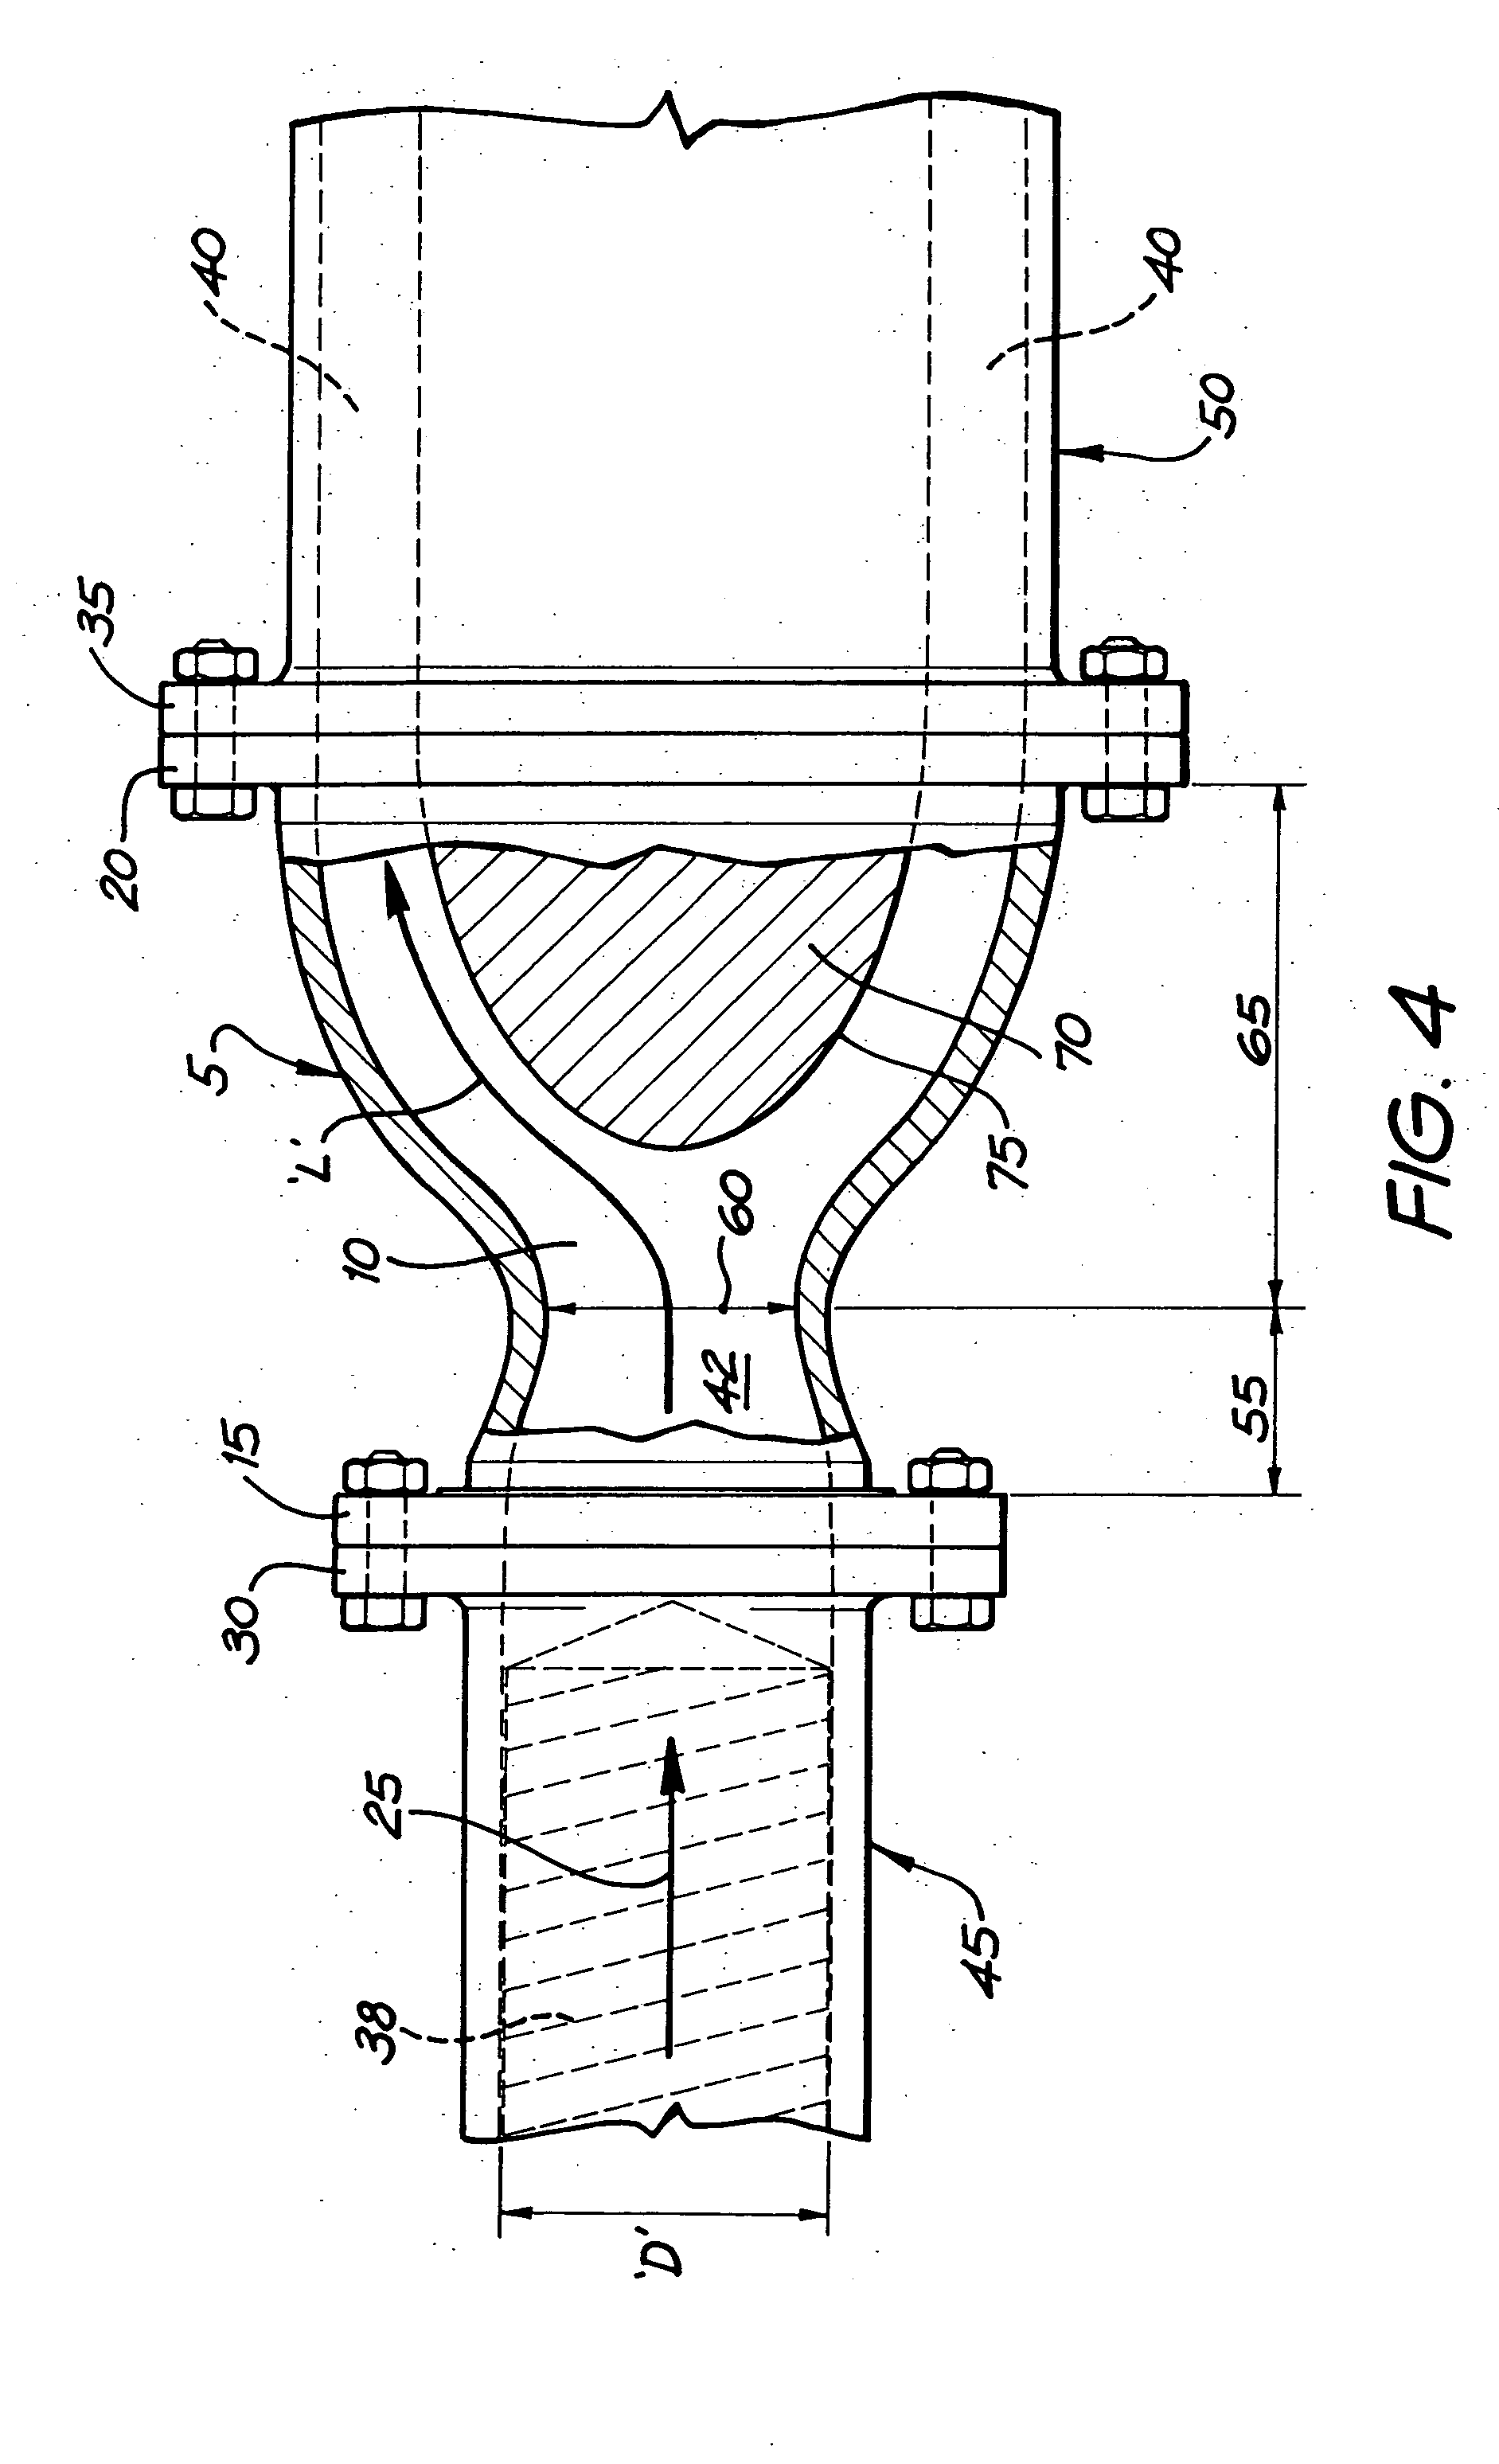 Flow distributor device for an extruder